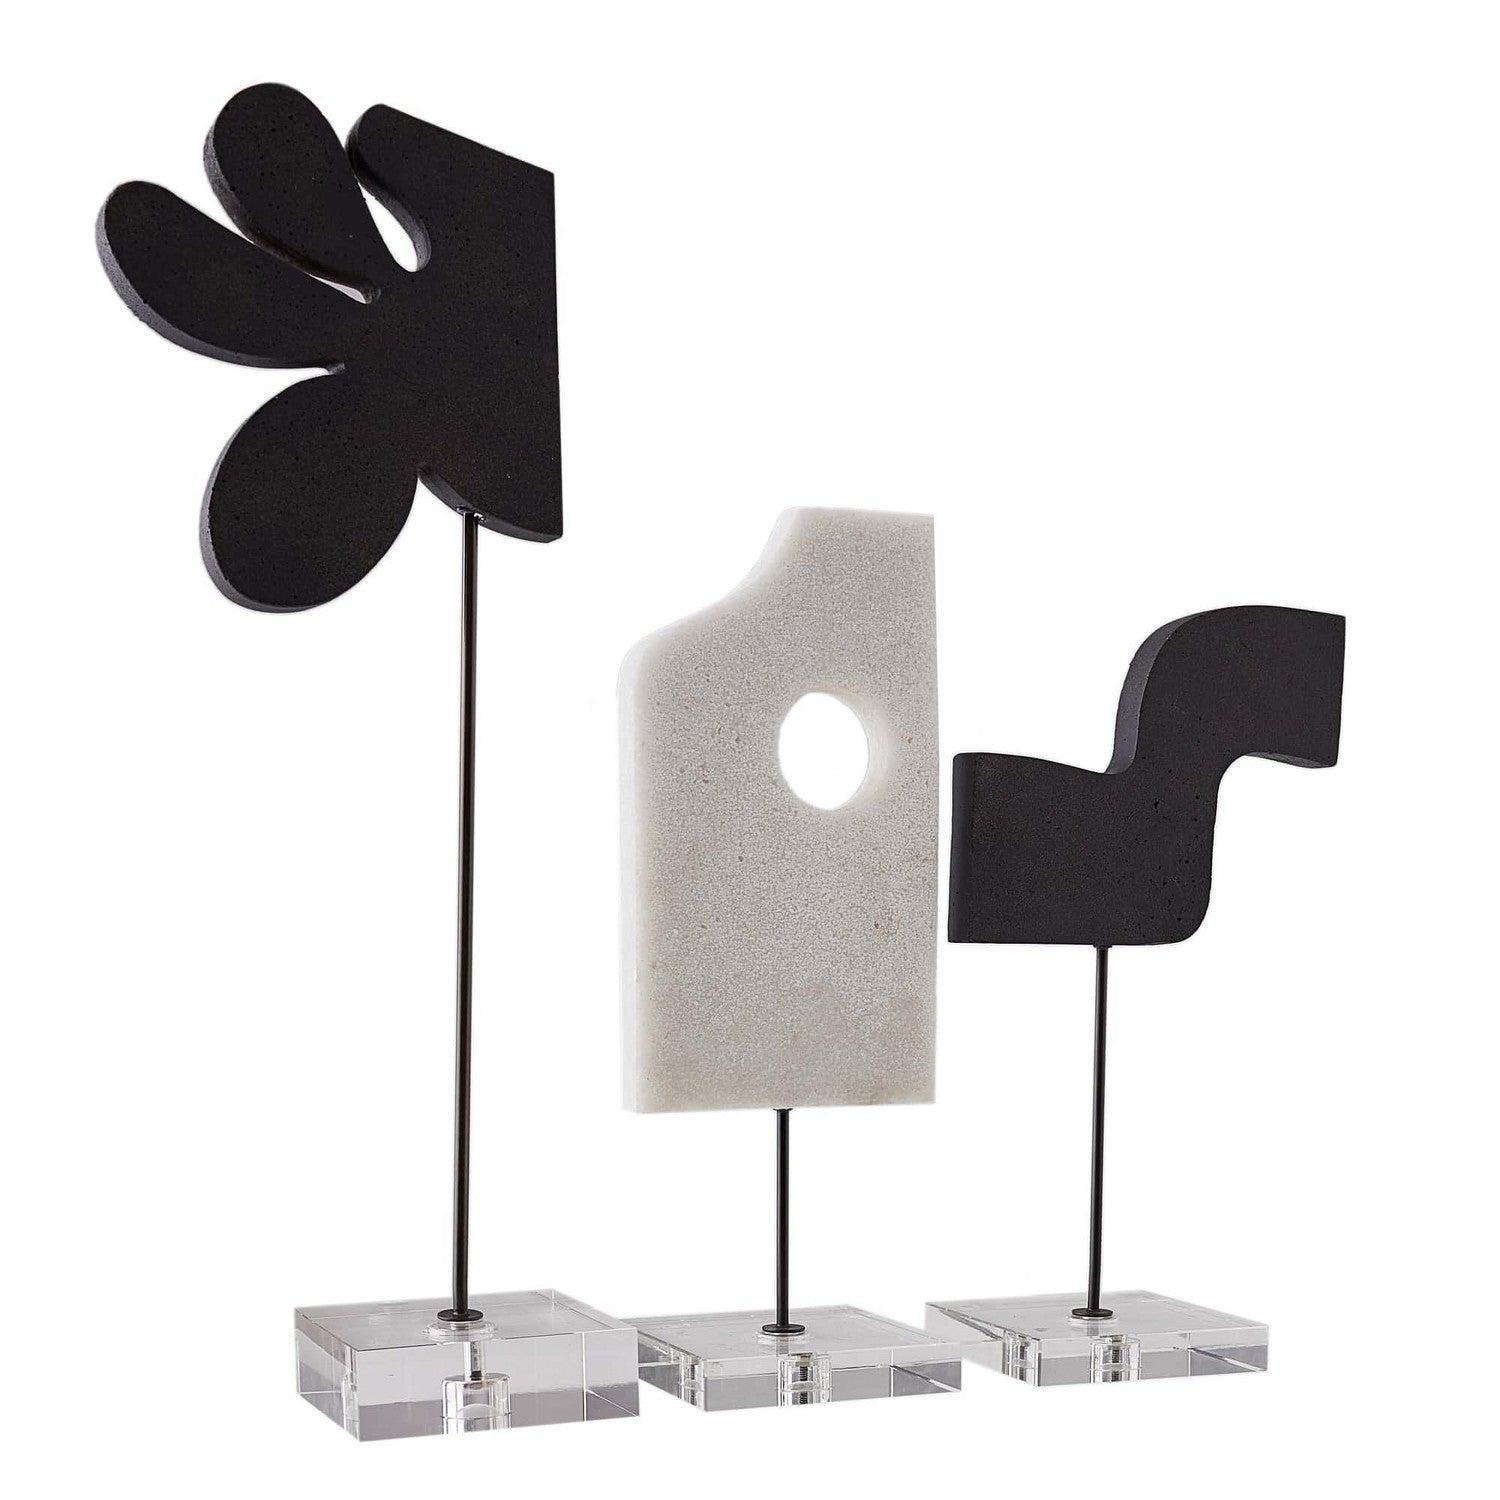 Sculptures, Set of 3 from the Uri collection in Charcoal finish